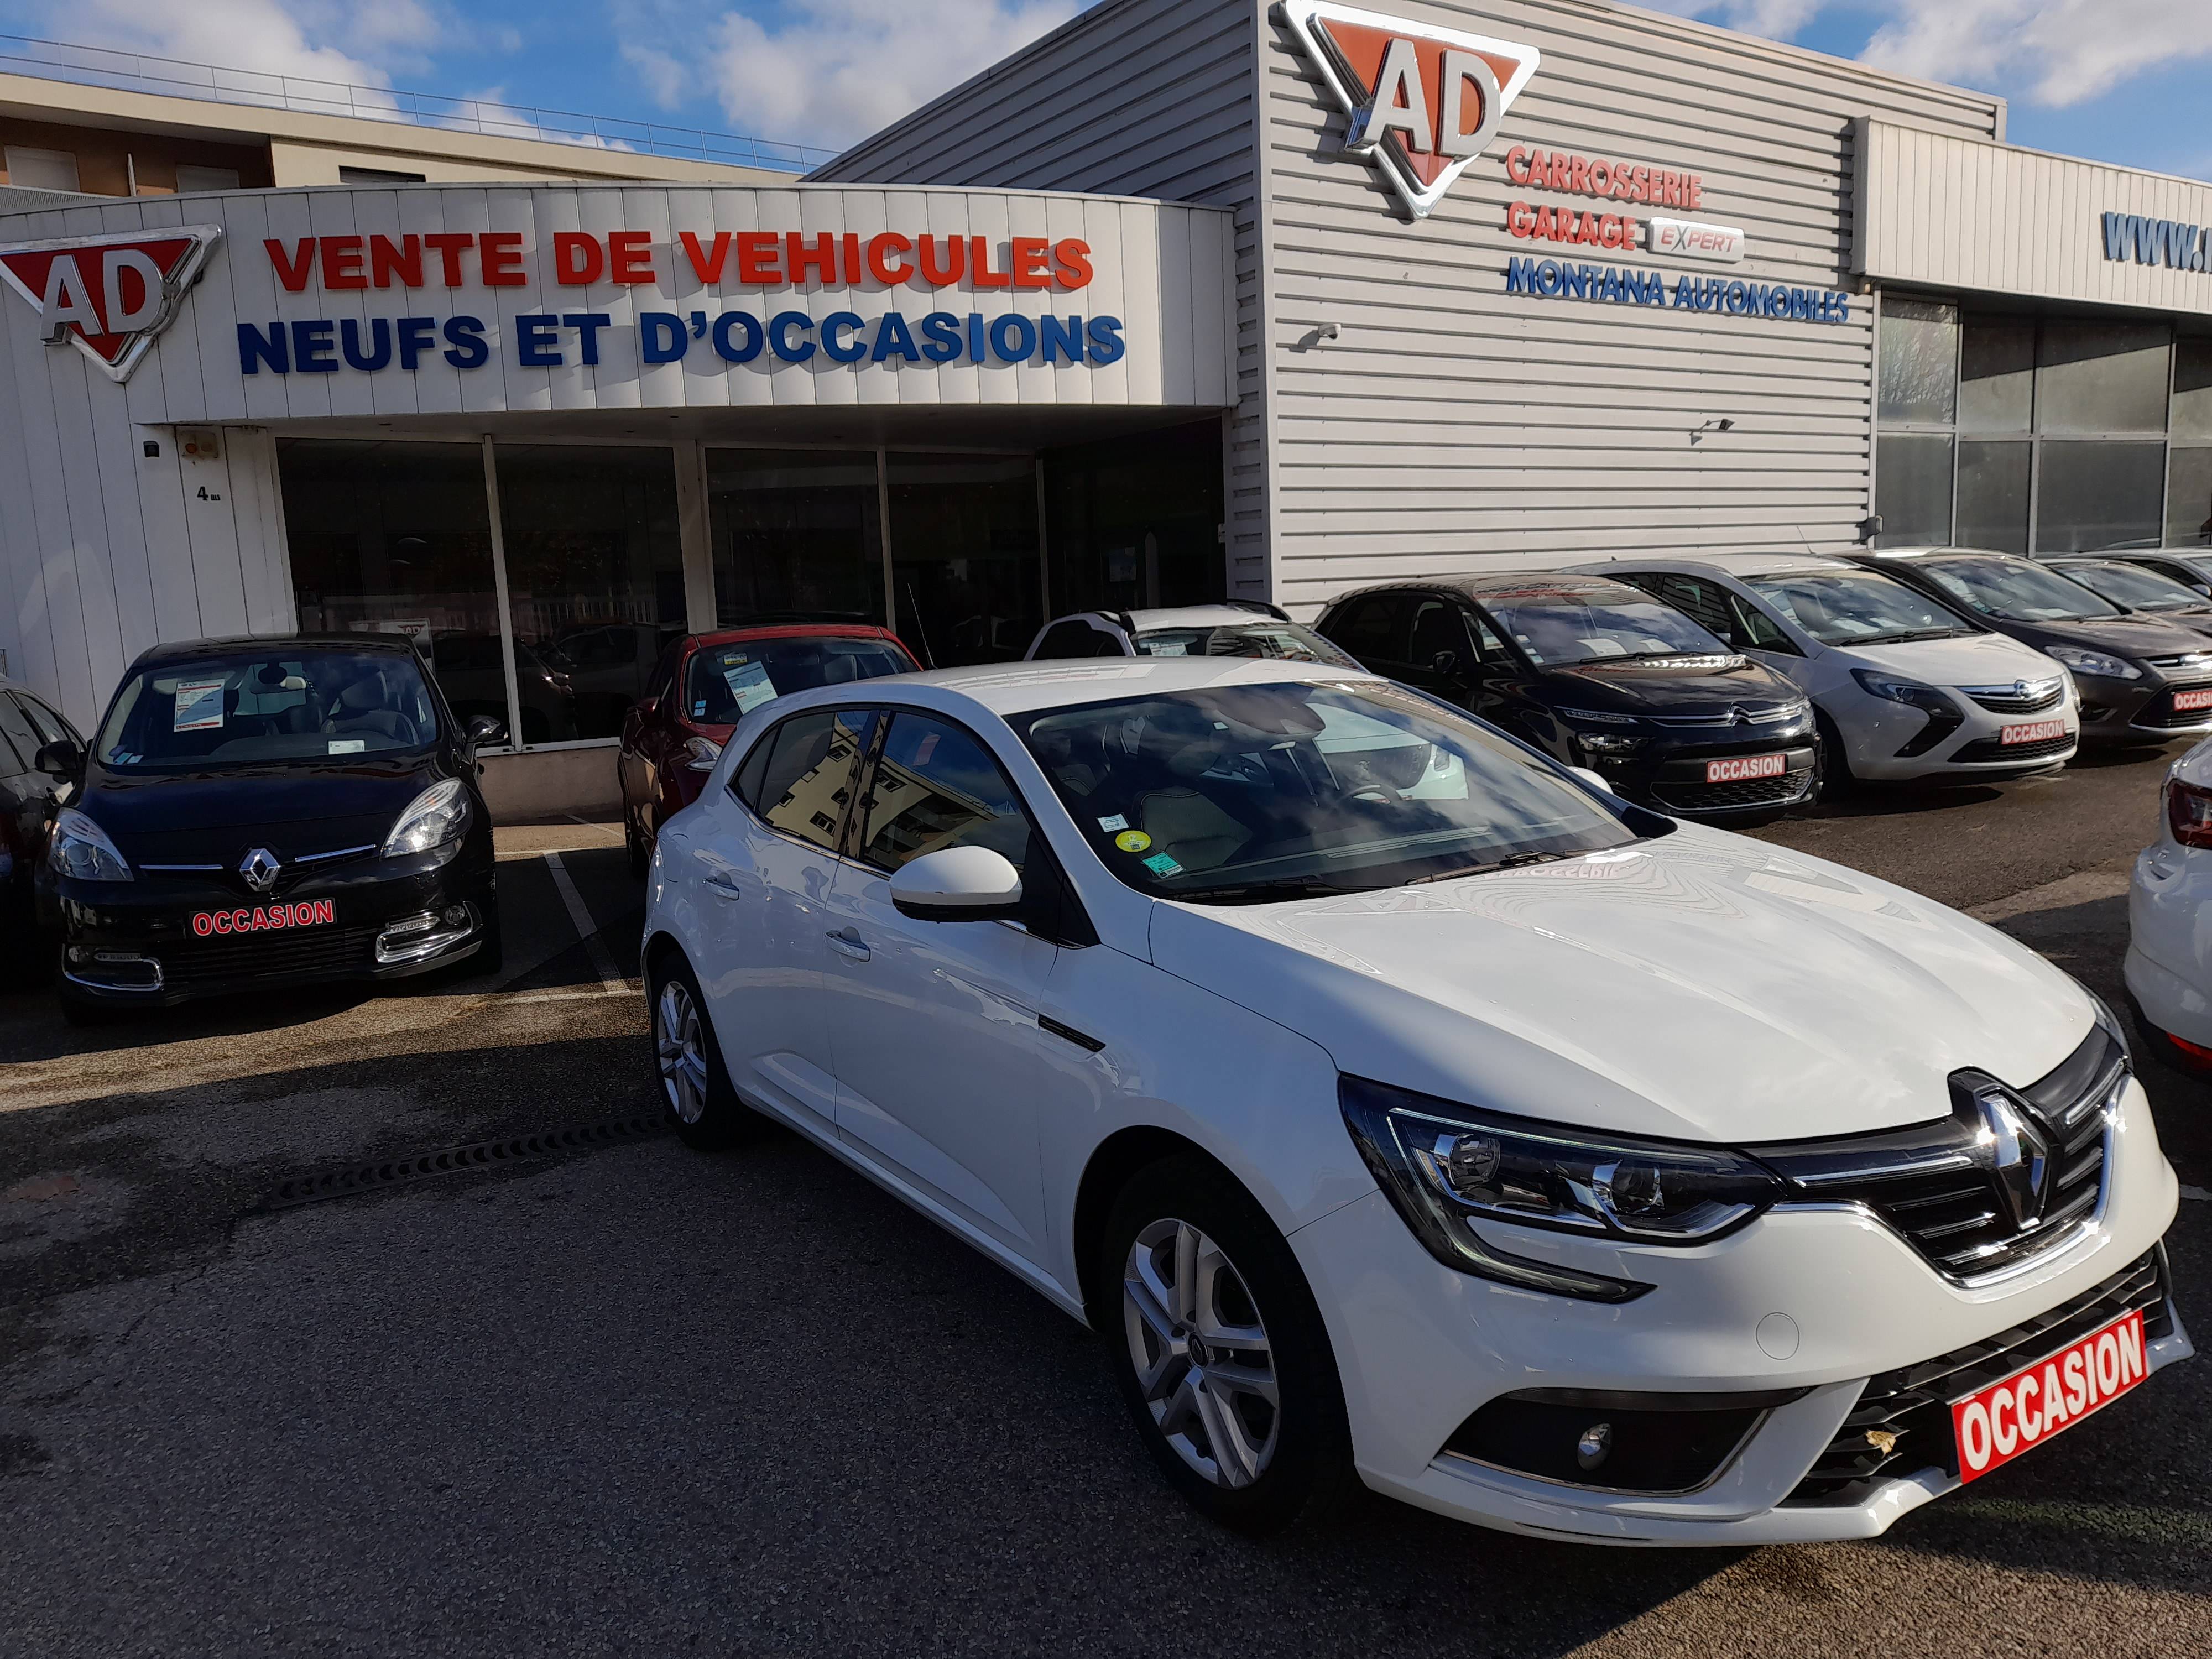 Renault Mégane  IV  1.5 dCi 110ch energy Business occasion - Photo 1